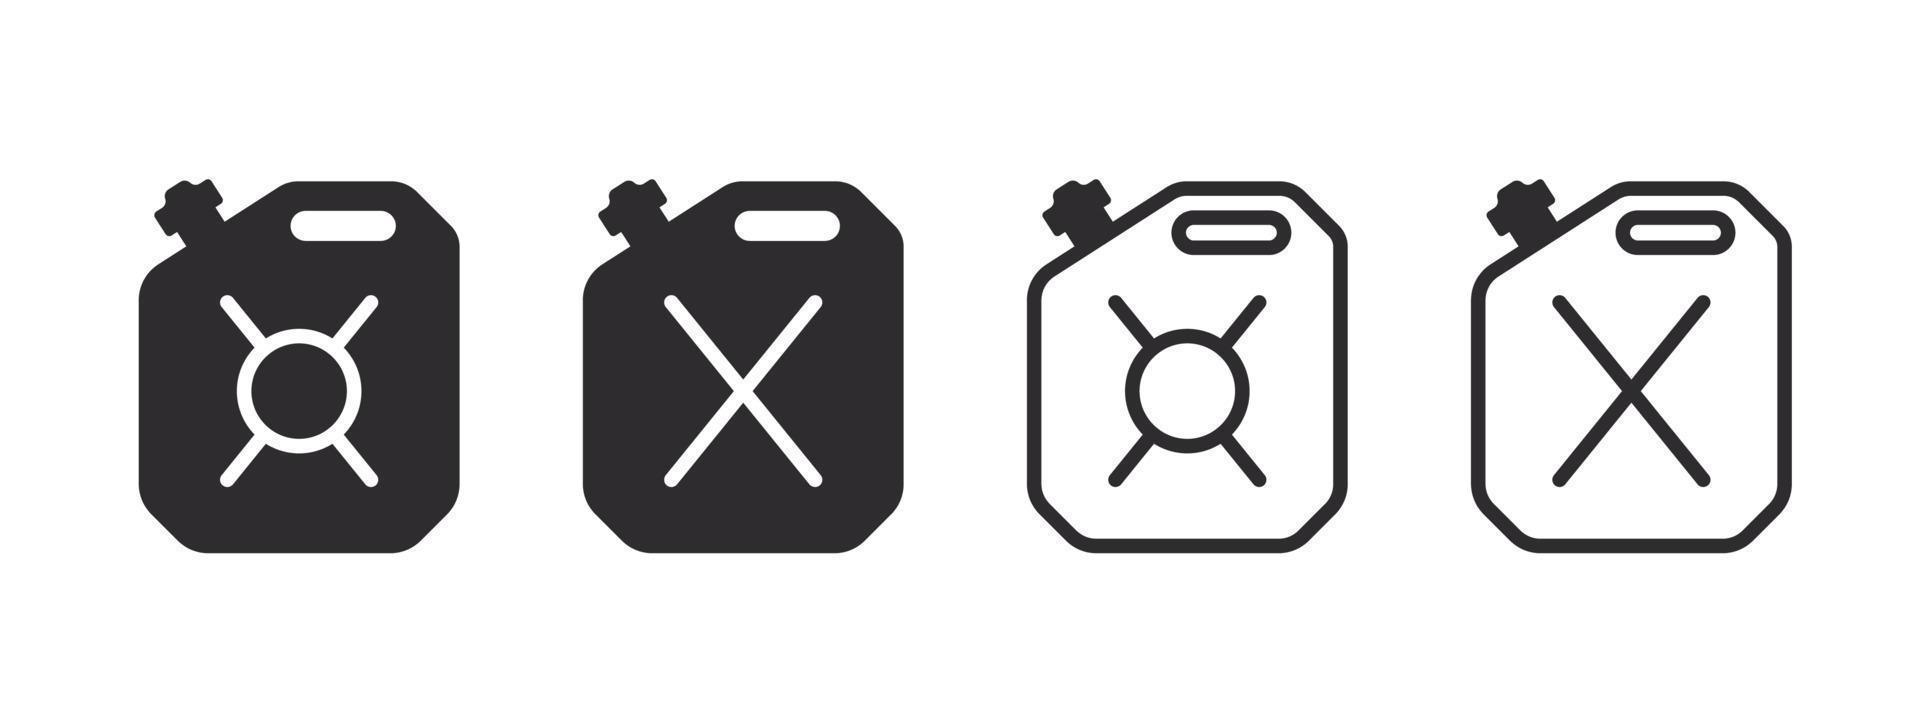 Canisters icons set. Fuel tank icon. Fuel can badges. Vector images